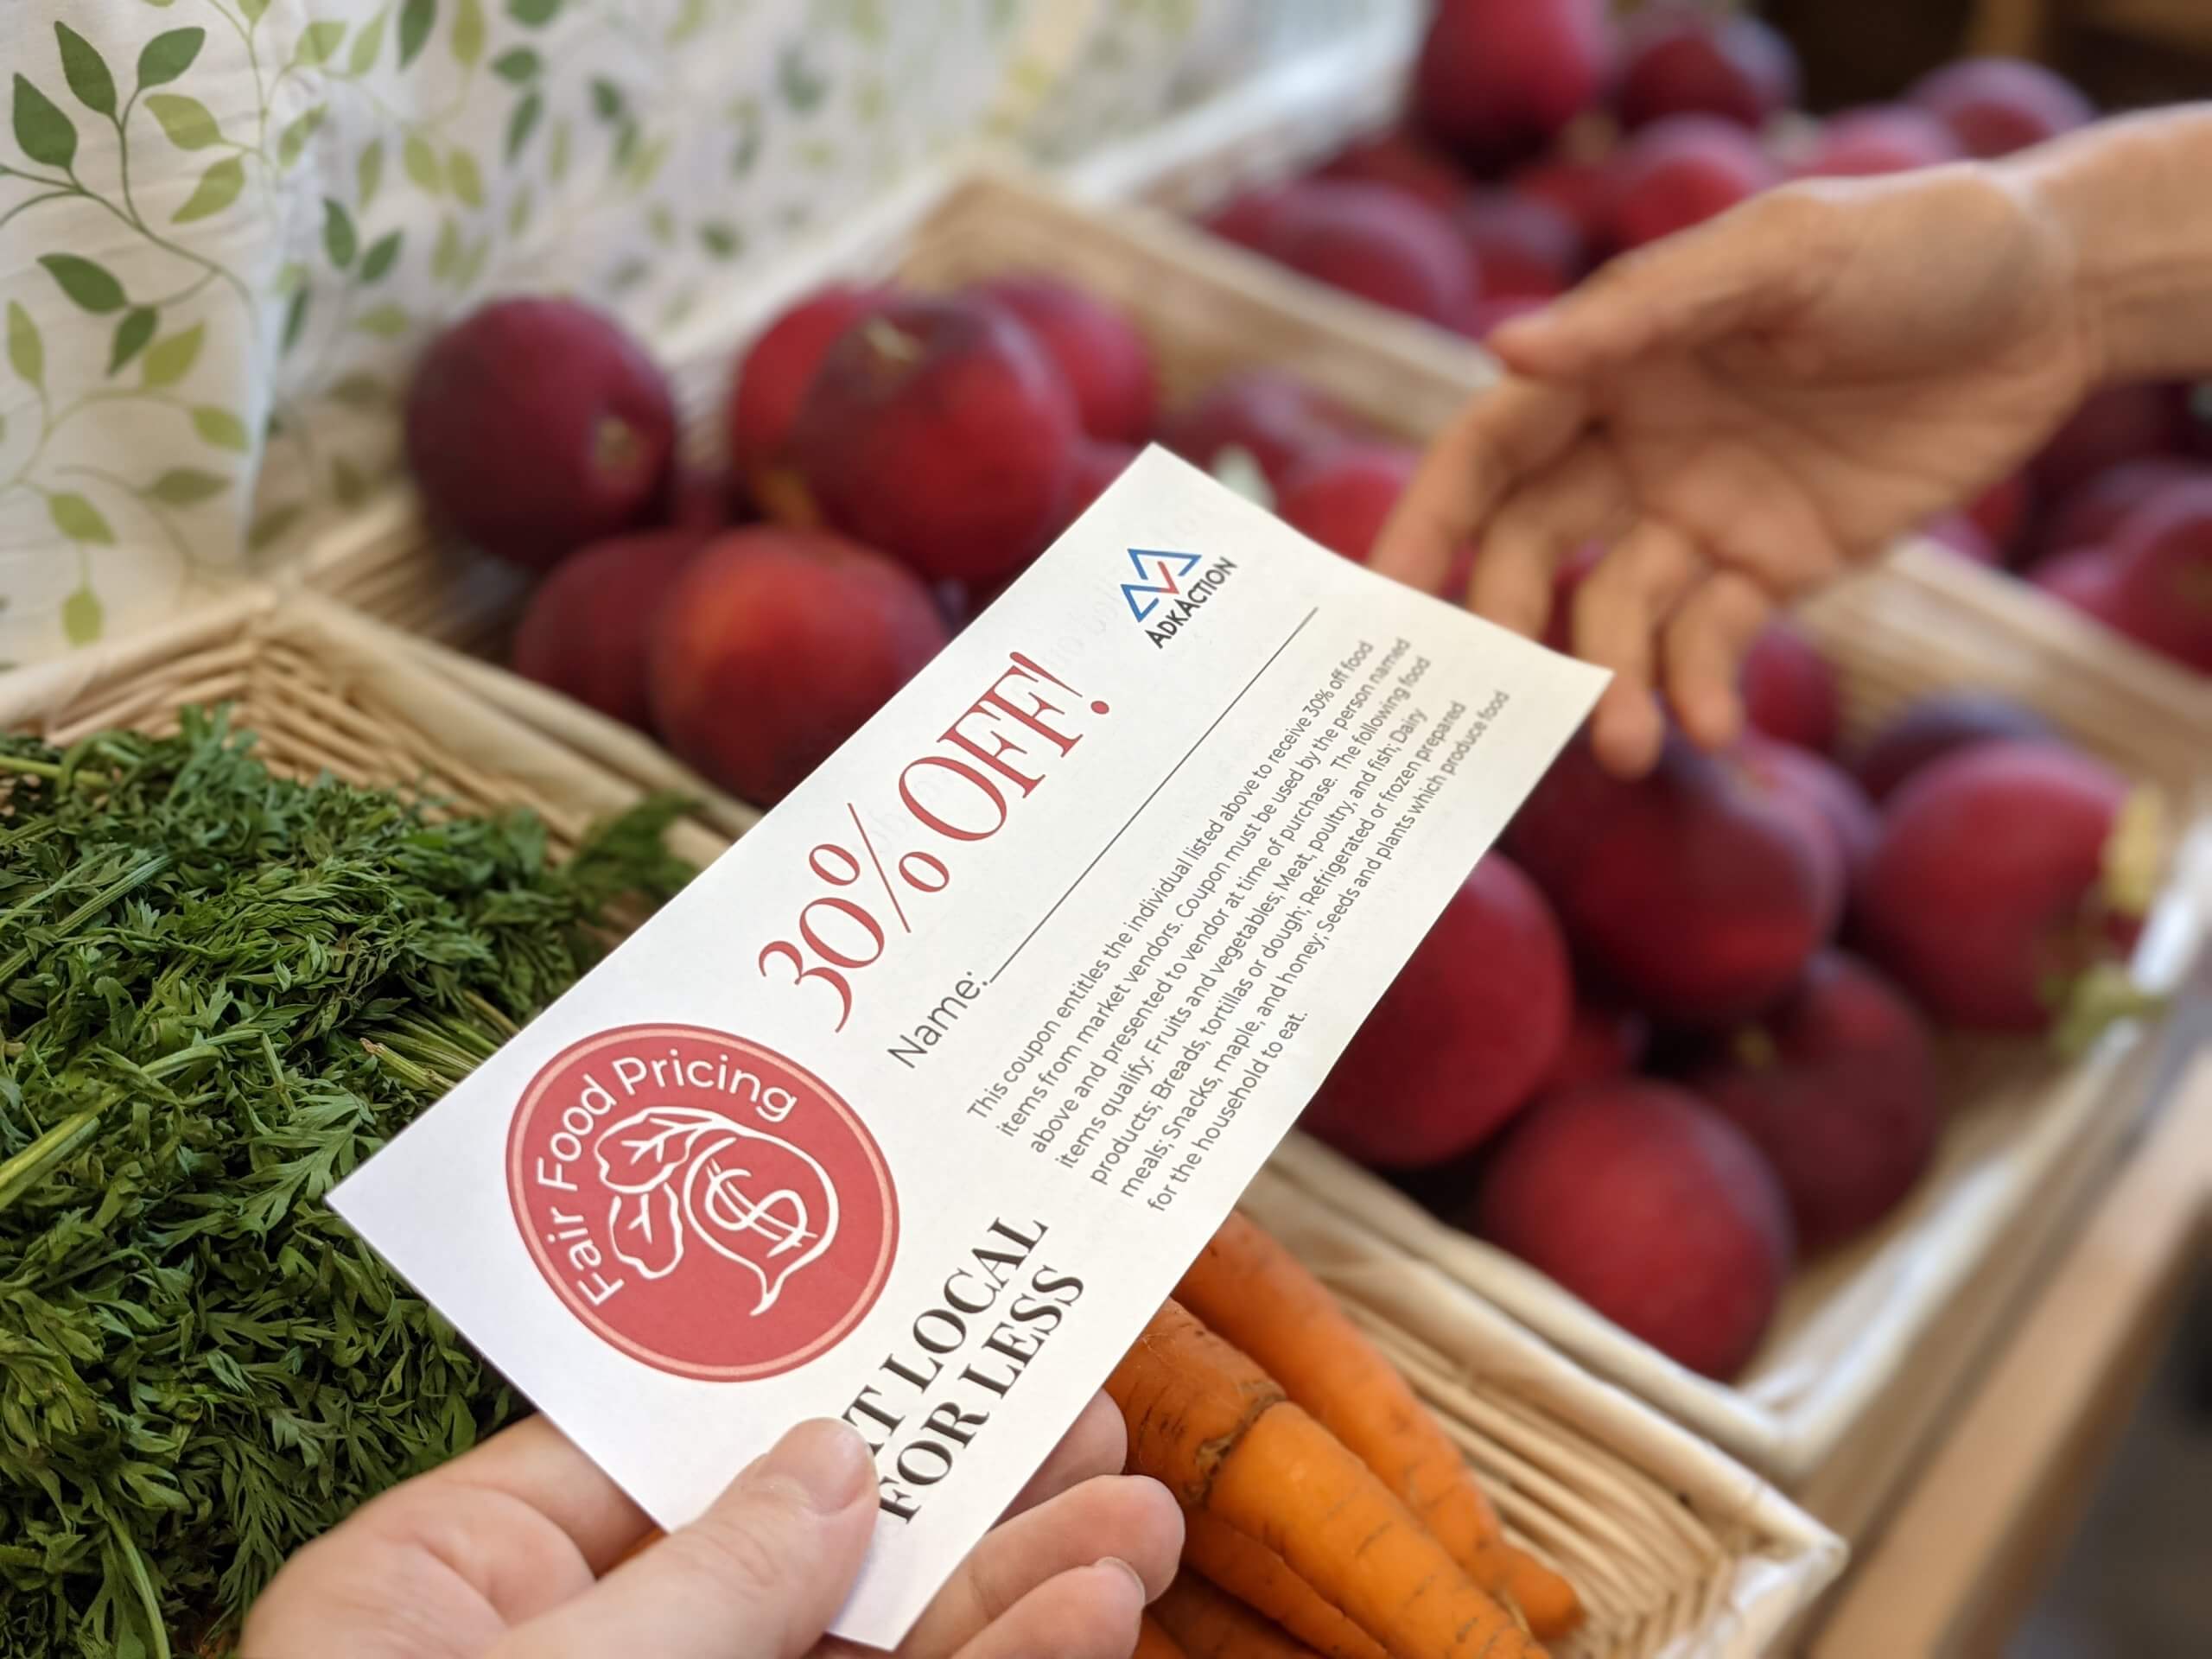 Eat Local for Less with AdkAction’s Fair Food Pricing